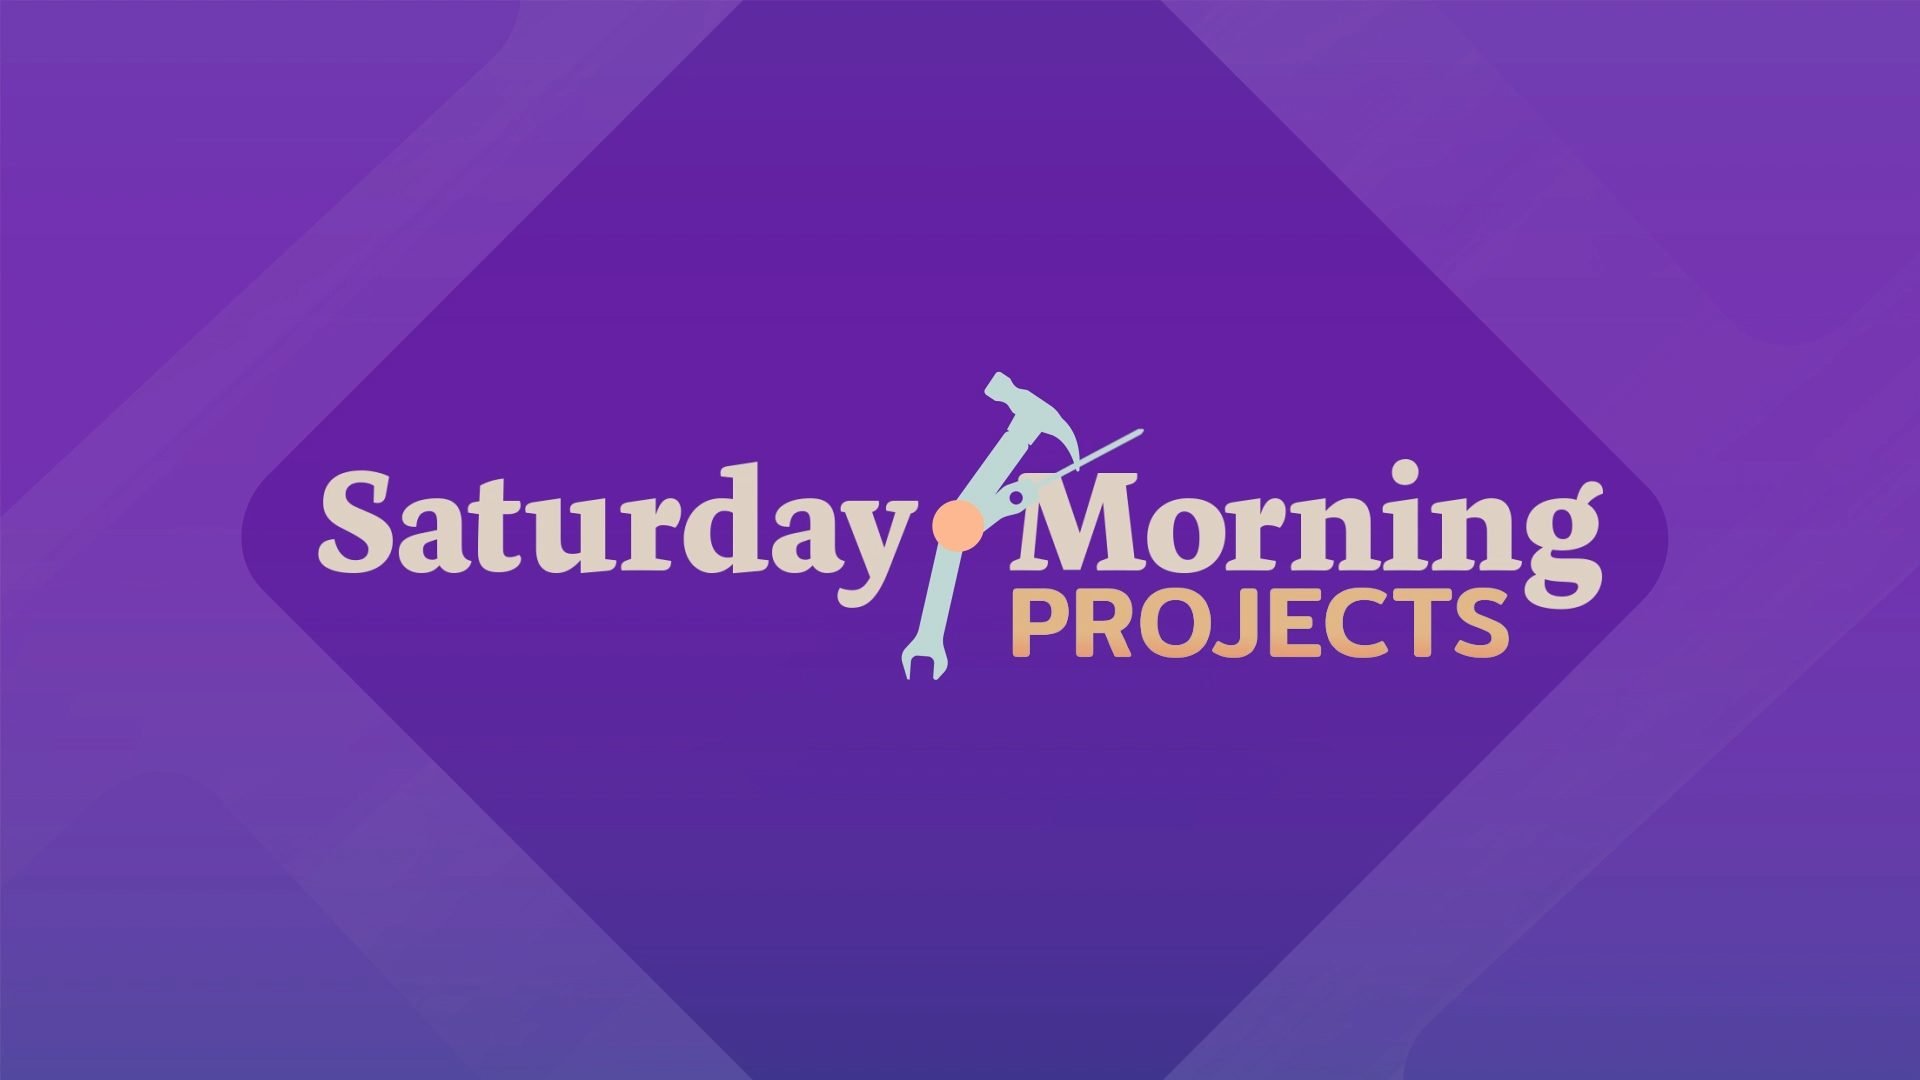 Make Your Home Stand Out with These Ideas from 'Saturday Morning Projects'